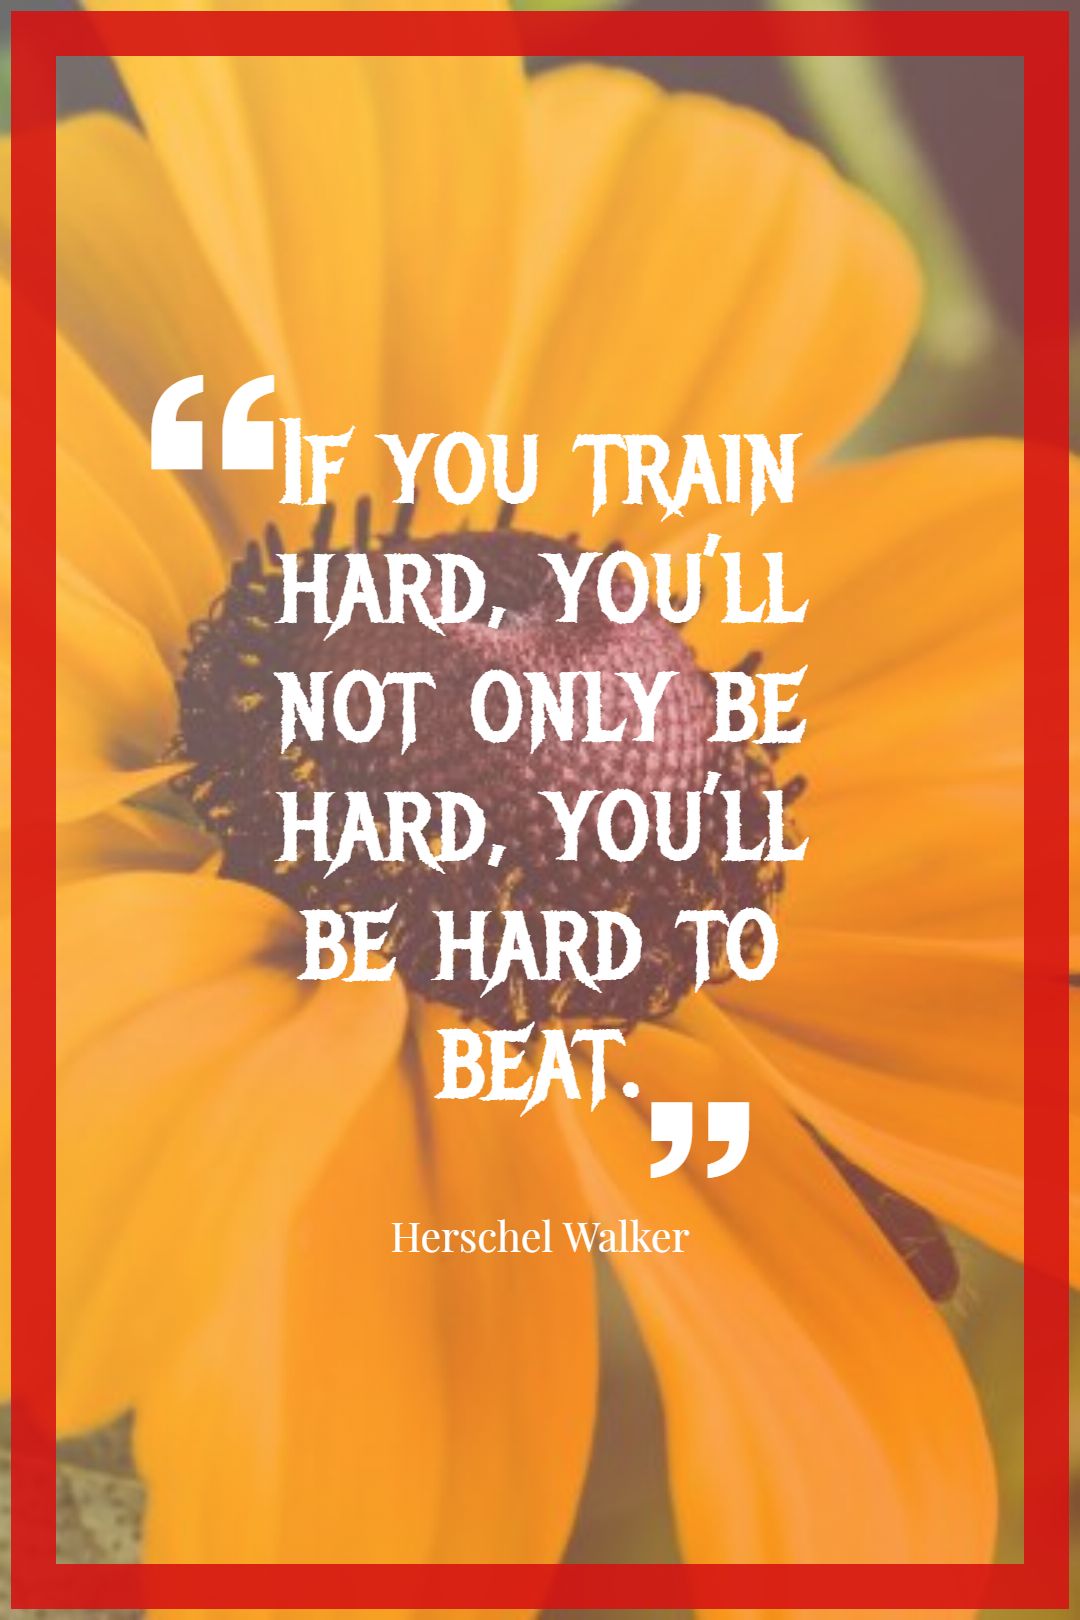 If you train hard you’ll not only be hard you’ll be hard to beat.